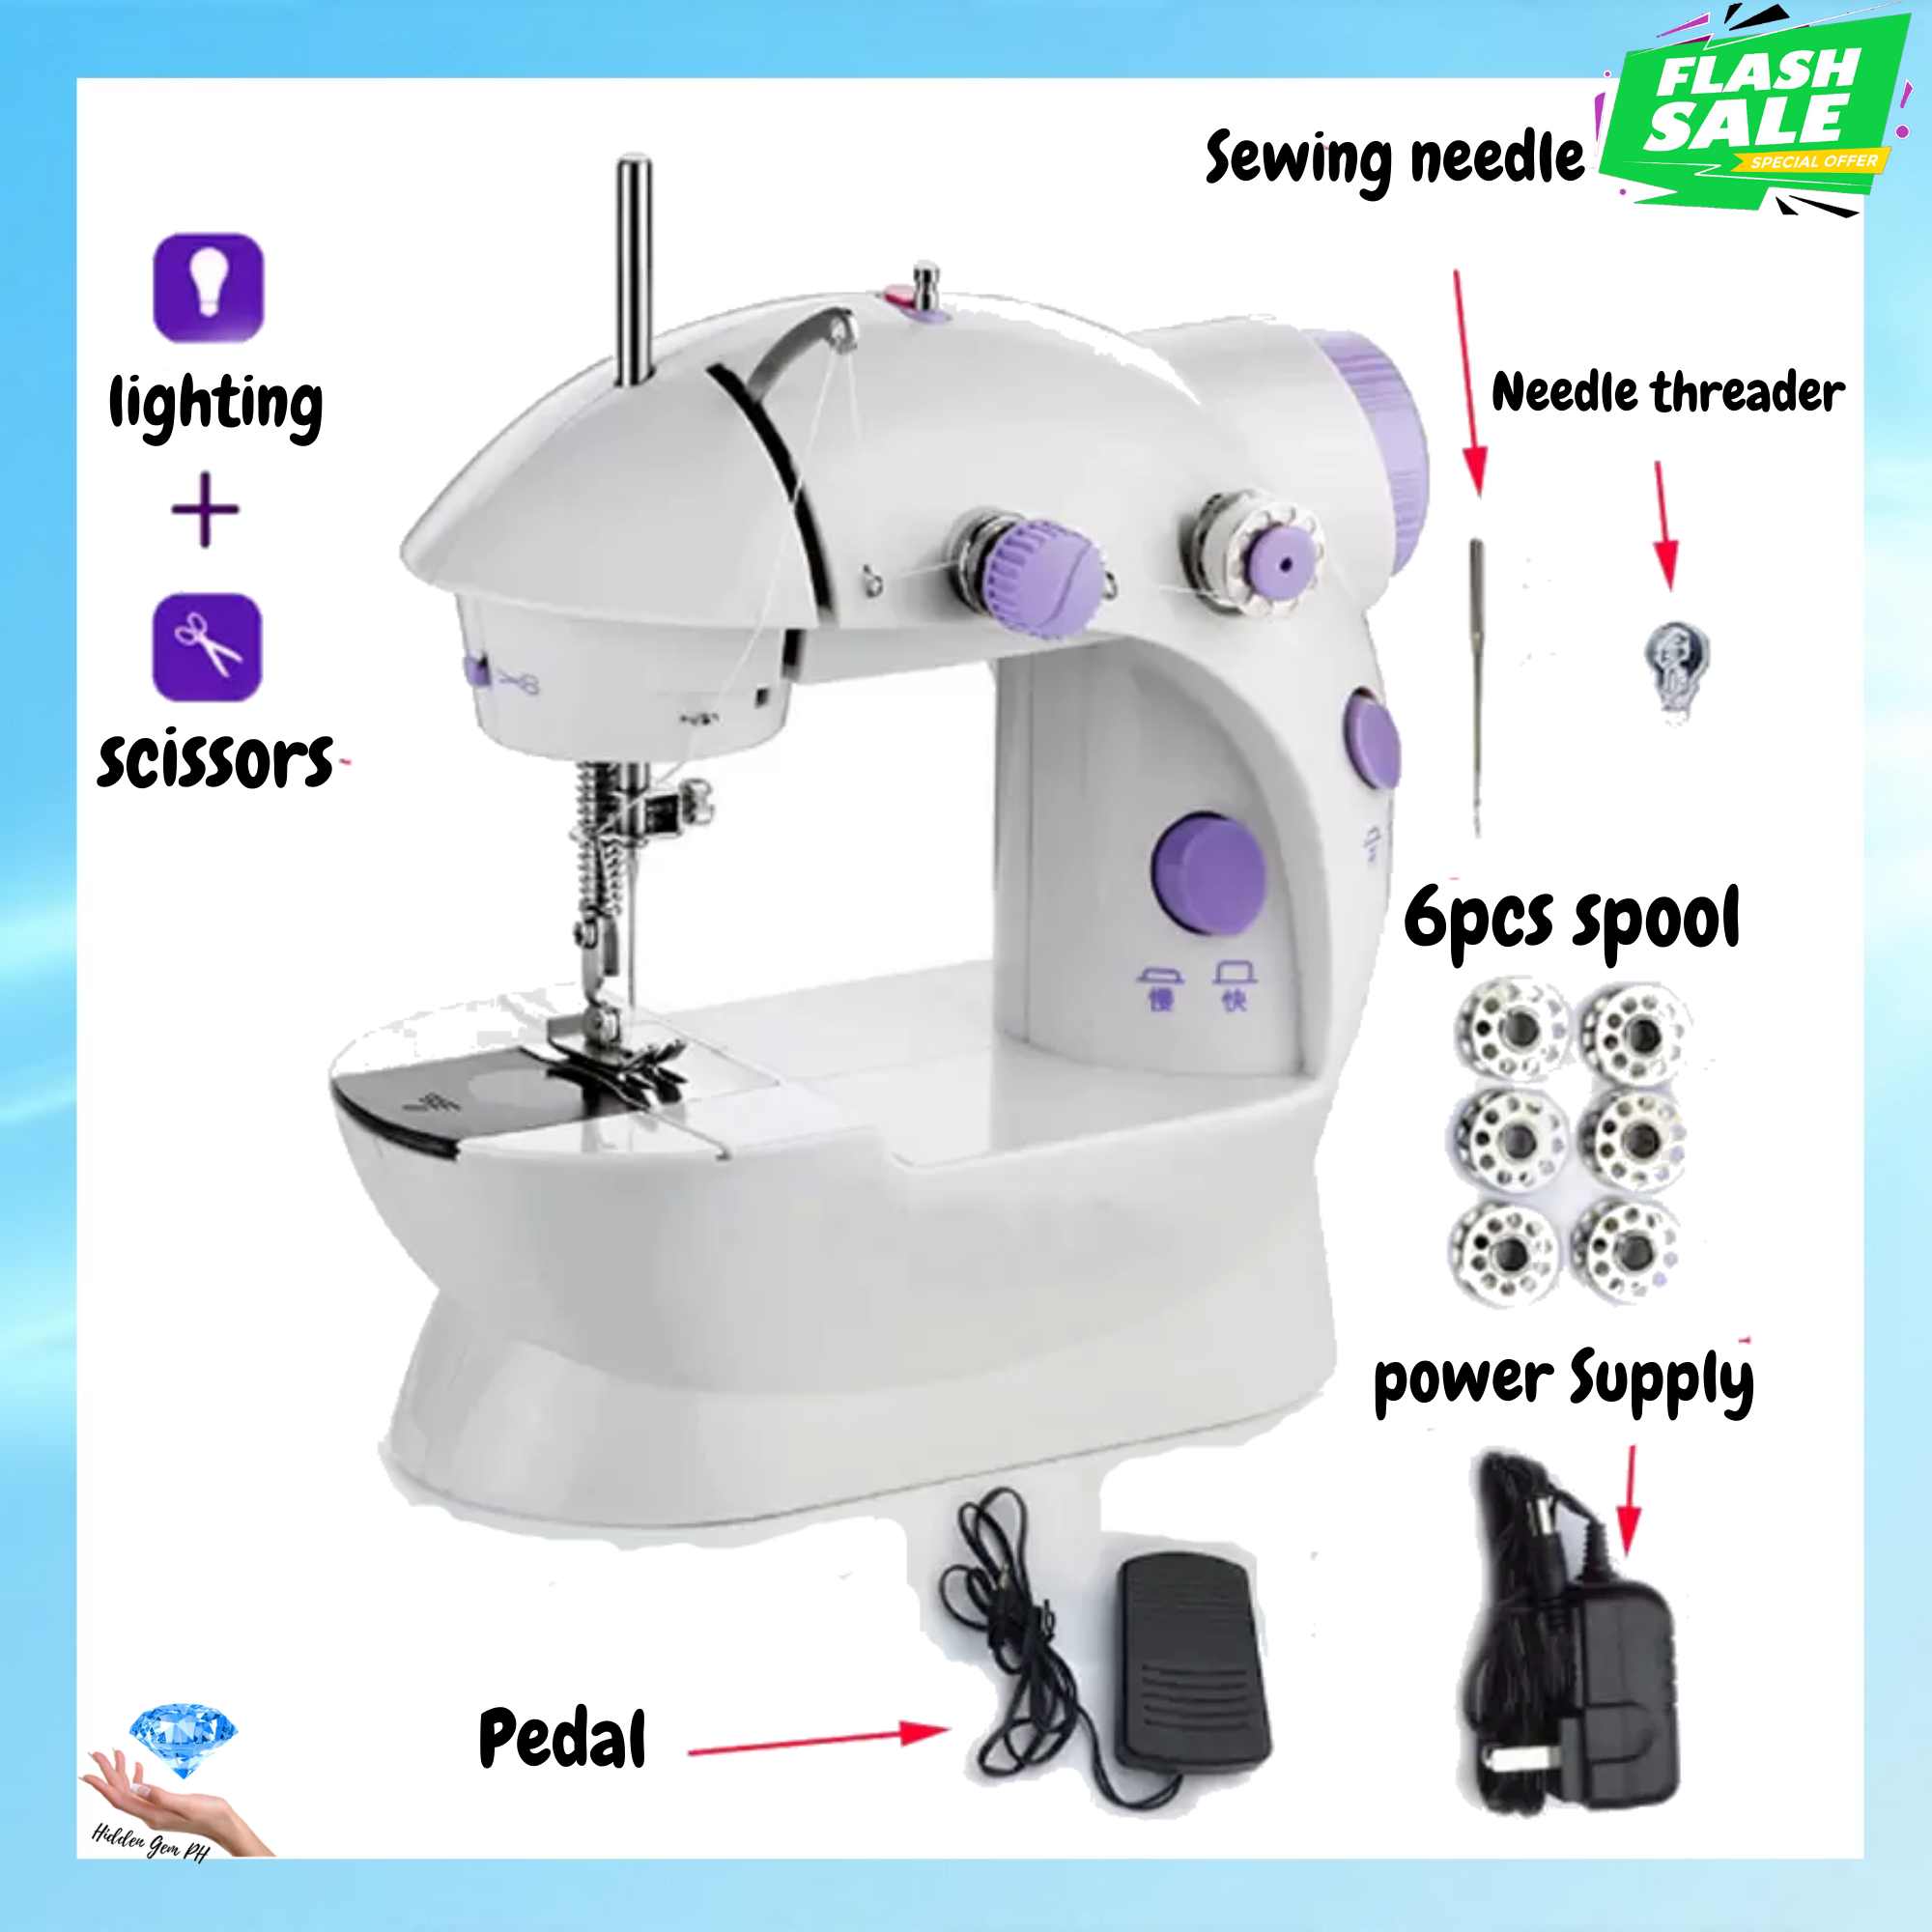 for Fabric Cloth Handicrafts Home Travel Use Sewing Machine Mini Portable Handle Electric Sewing Machine for Beginners Adult,Household Quick Repairing Tool with Conventional Kit